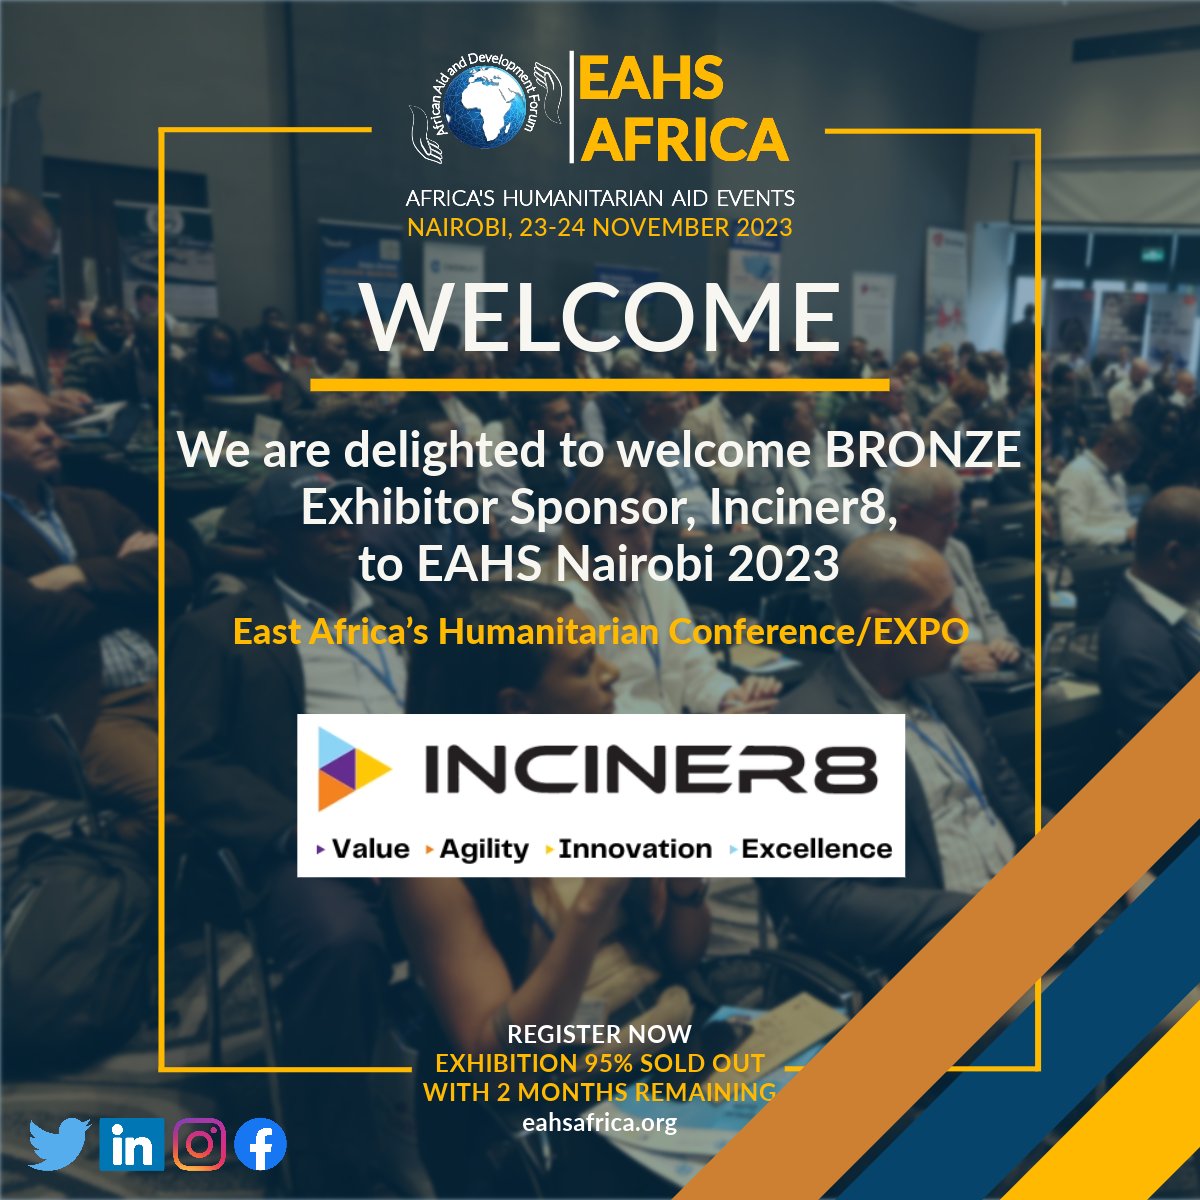 📢 Sponsor Alert!  

We are delighted to welcome BRONZE SPONSOR, @Inciner8, to EAHS Nairobi 2023, Africa's Humanitarian Conference/ Expo, taking place in Gigiri, Nairobi, Kenya from the 23-24 November 2023 #PPP #sdg17   

THE ONLY ANNUAL EVENT OF ITS KIND, IN EAST AFRICA FOR EAST